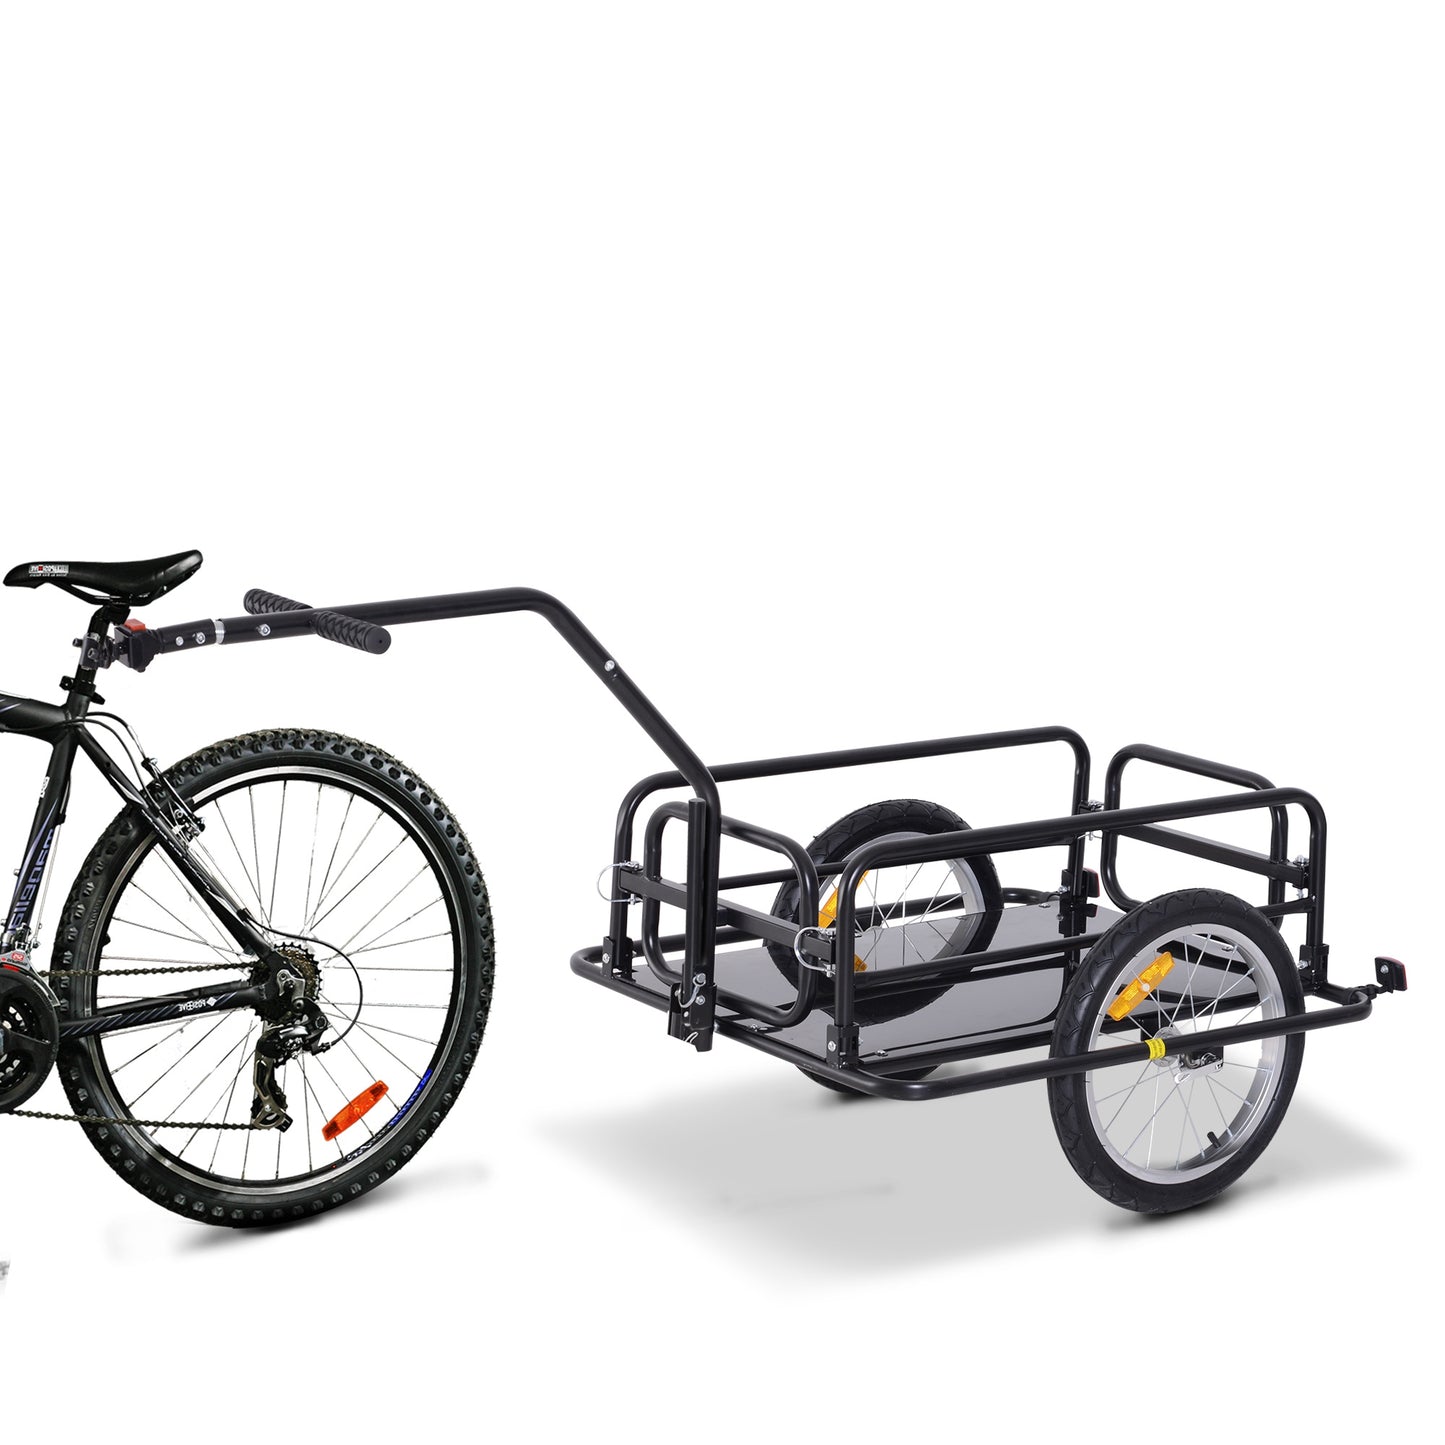 HOMCOM Folding Bicycle Cargo Storage Trolley Cart and Luggage Trailer with Hitch Black